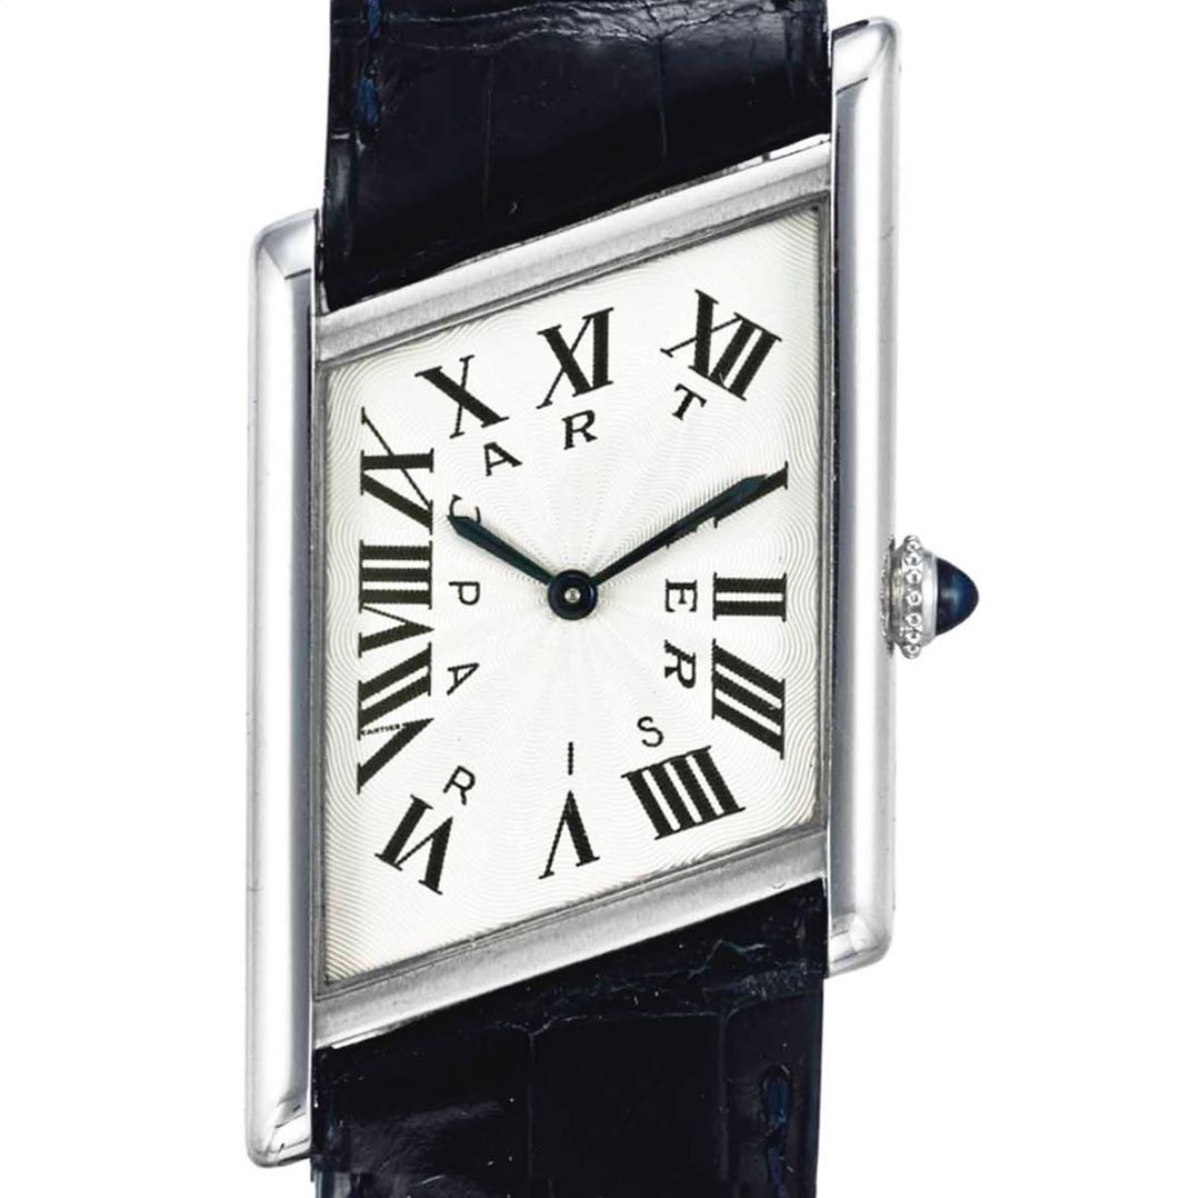 Great 'Grams: The Cartier edition - Time and Tide Watches